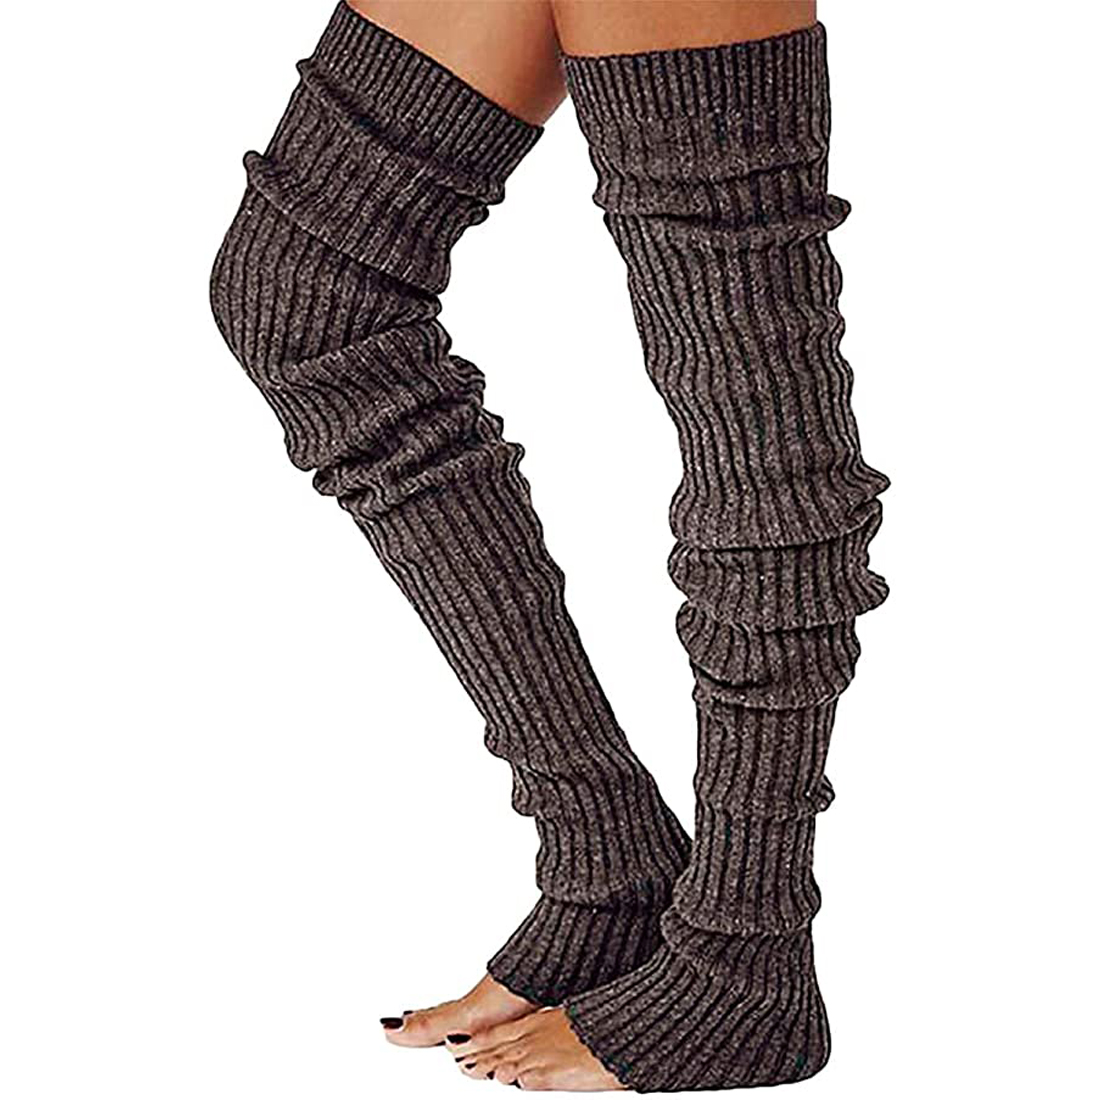 Womens Over Knee Socks Thigh High Cable Knit Stockings Boot Extra Long Winter Leg Warmers Thick